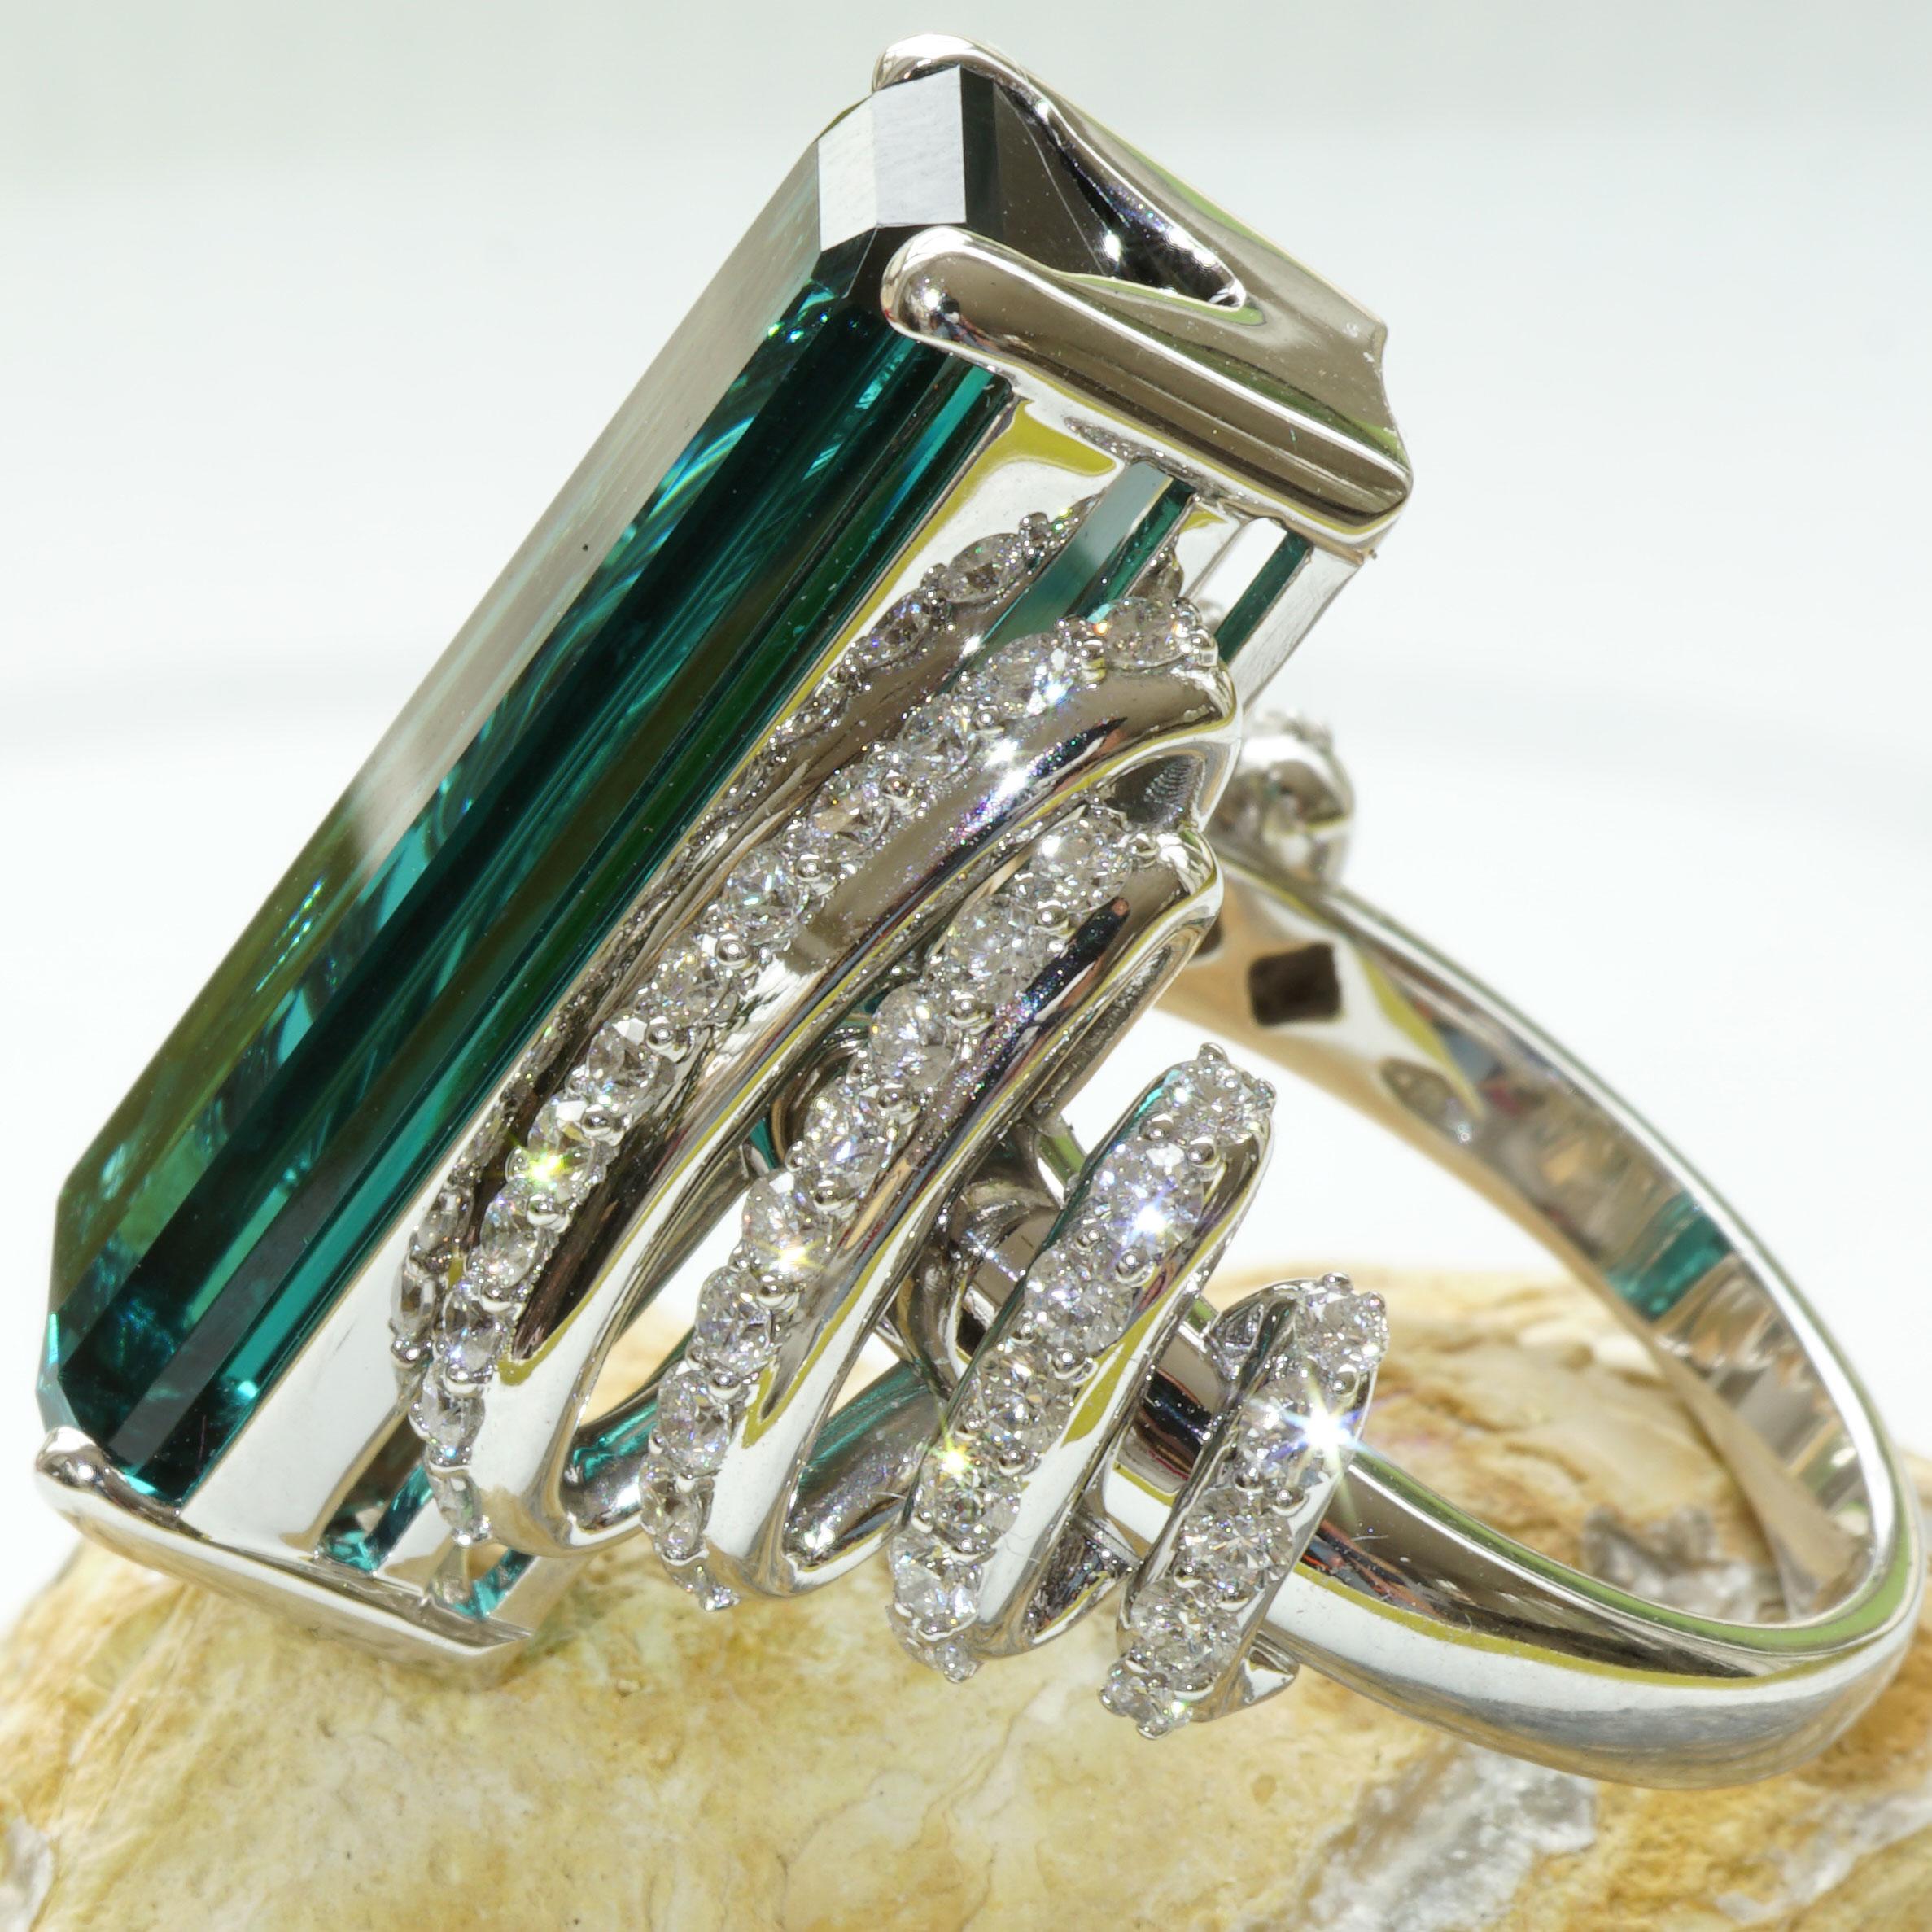 Brilliant Cut Unimaginably Mysterious Mint Blue Indicolith Brilliant Ring from Afghanistan